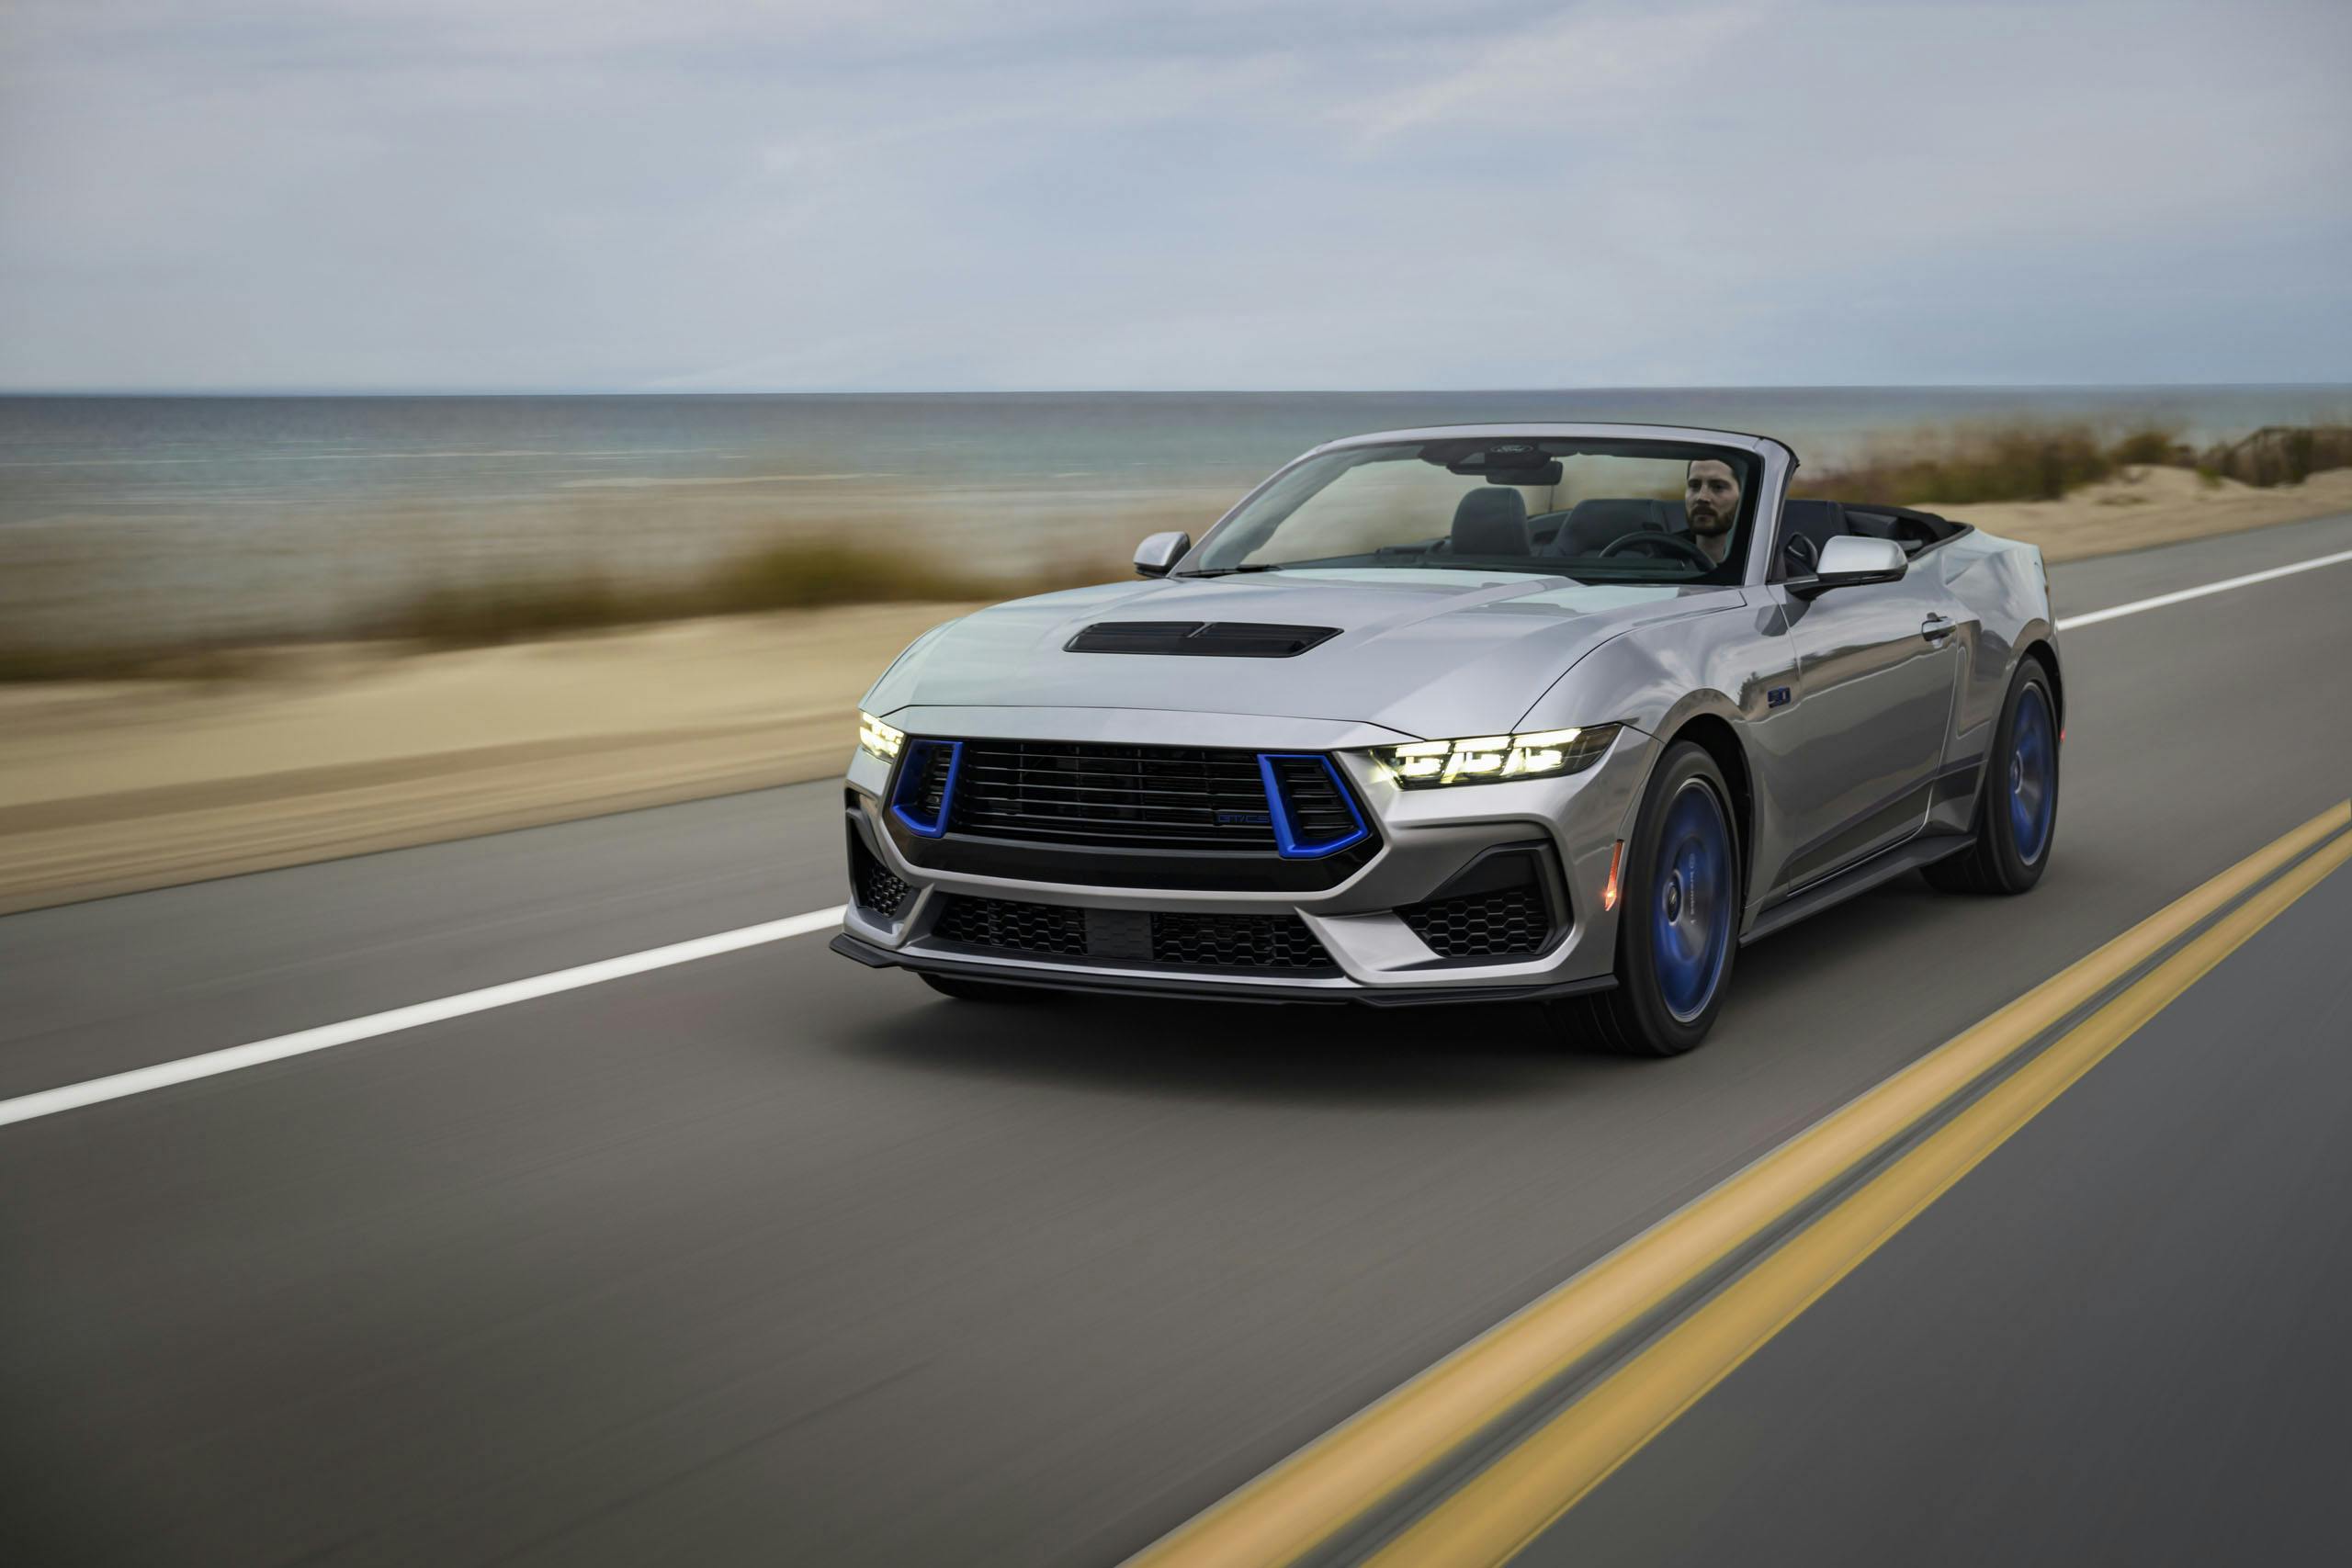 2024 Ford Mustang Pricing Announced. Here's What You Need to Know